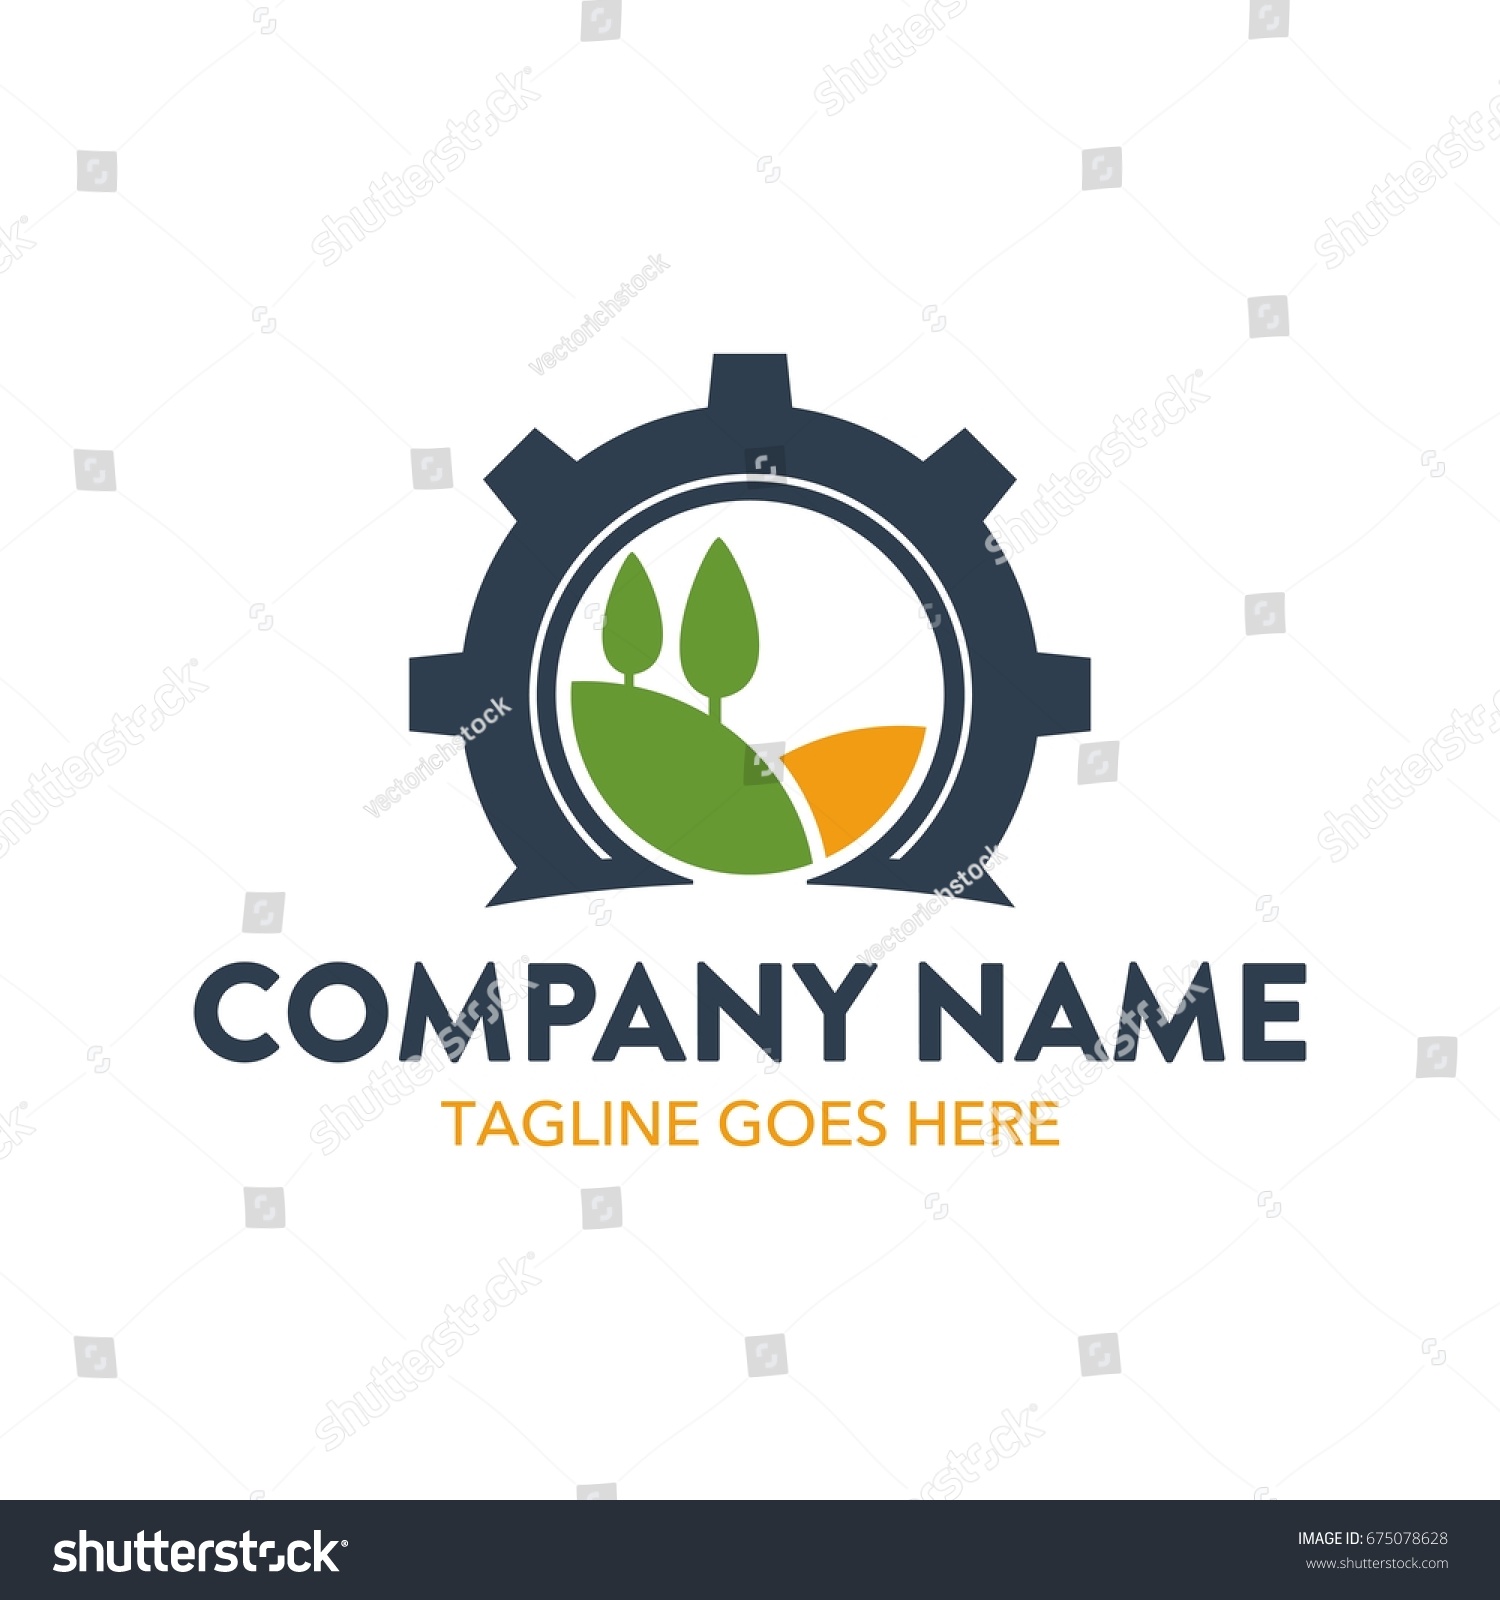 Agriculture Logo Template Stock Vector (Royalty Free) 675078628 ...